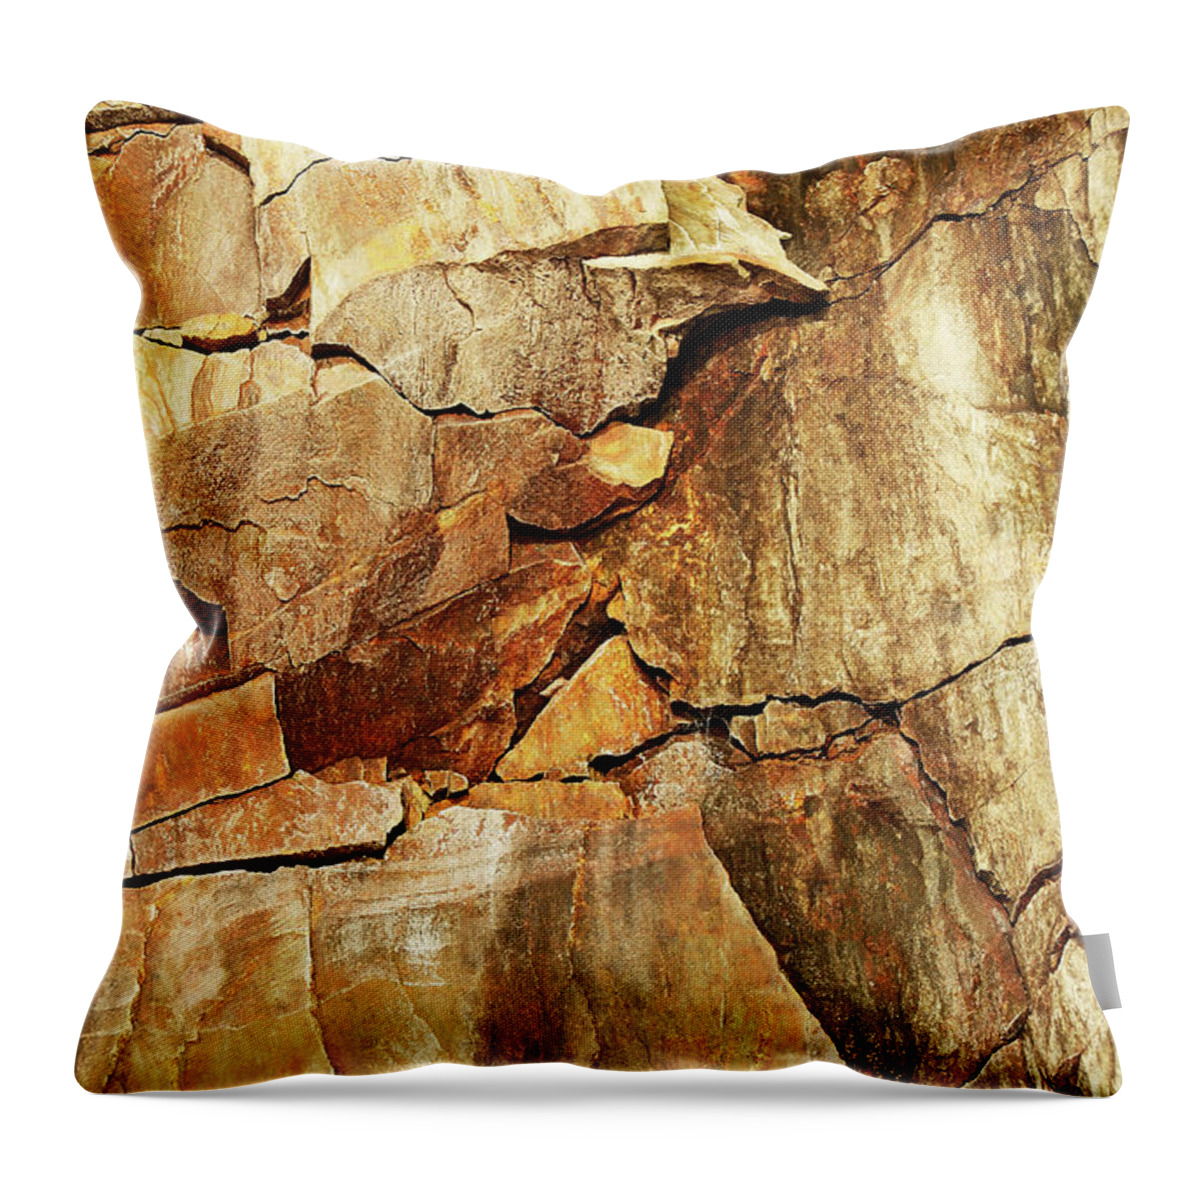 Natural Pattern Throw Pillow featuring the photograph Face-like Figure Rock Formation by Stuart Paton